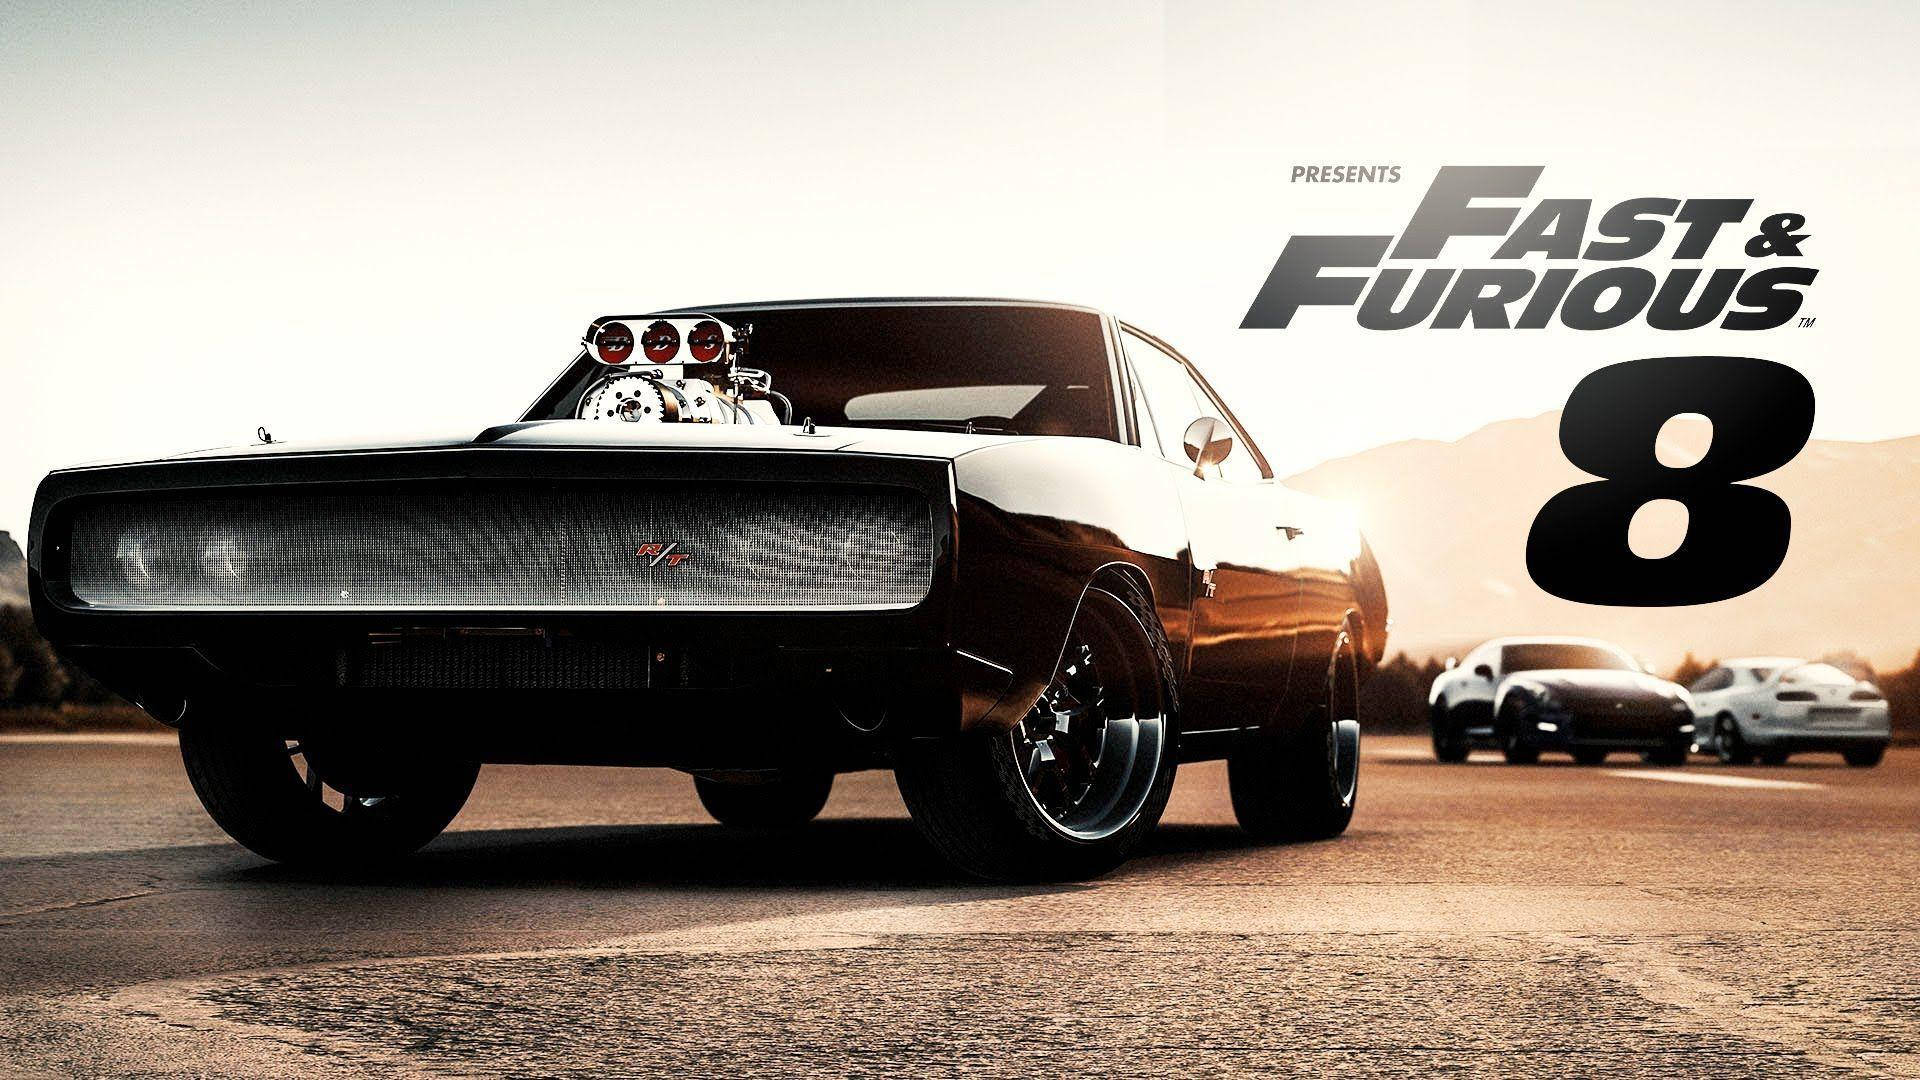 Zoom into Action with the Fast And Furious 8 Car Wallpaper